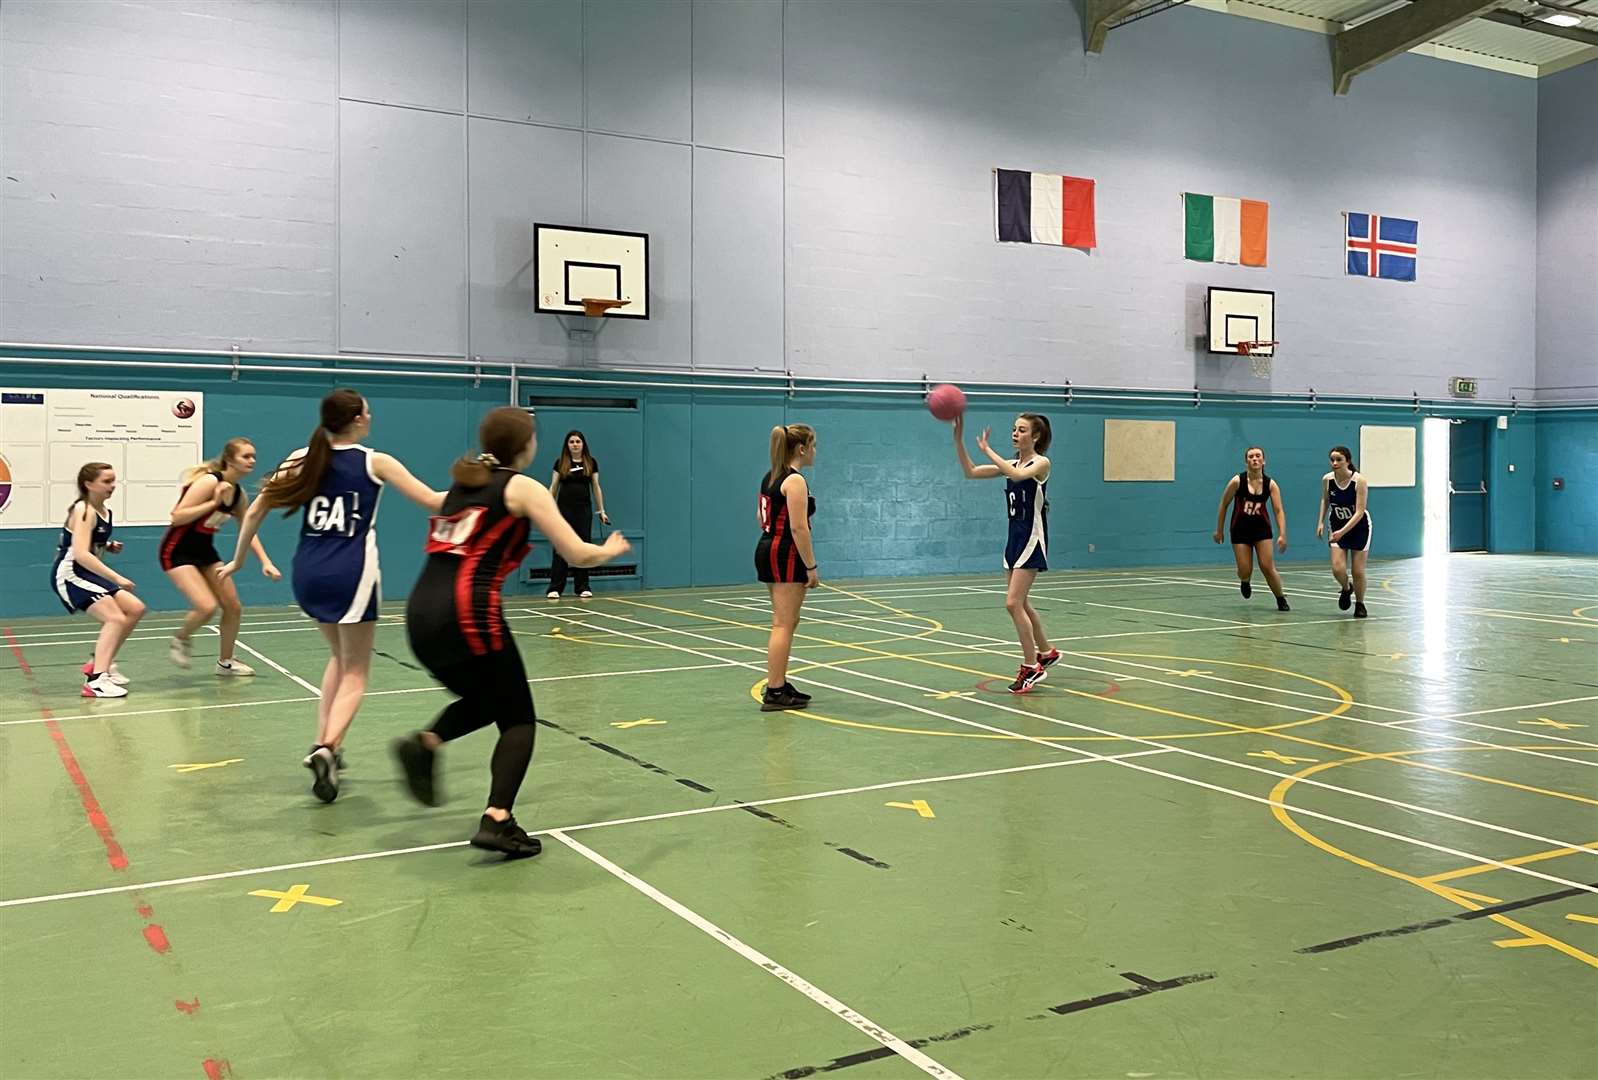 Action from one of the matches at Thurso High School.